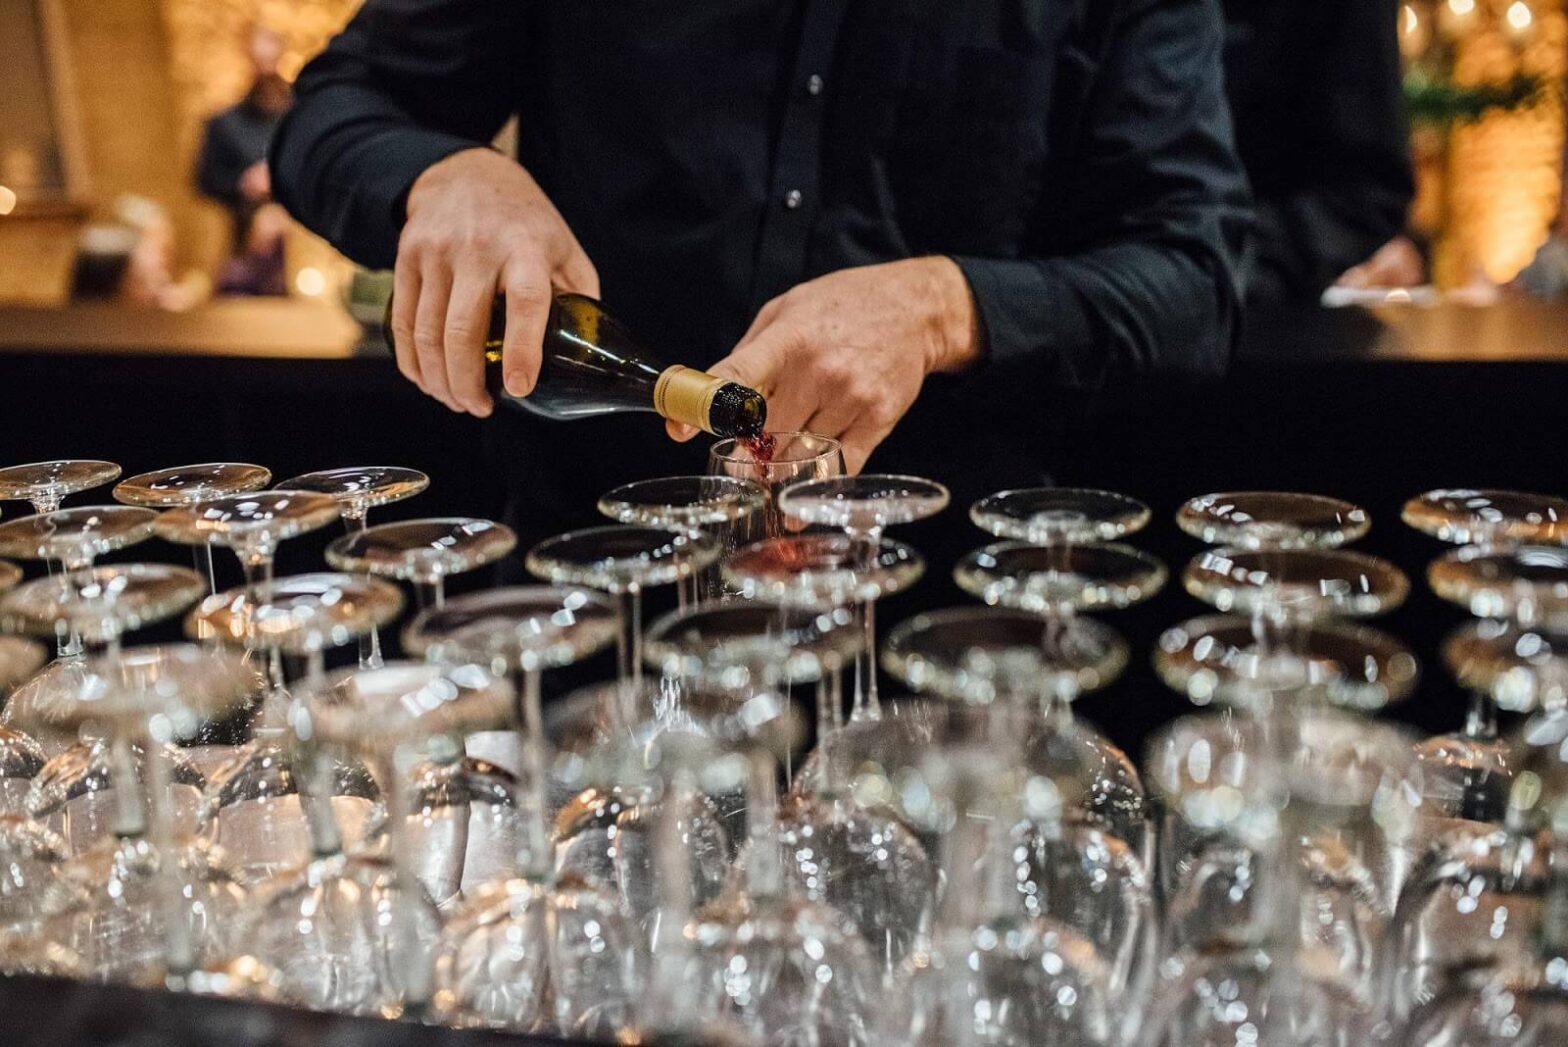 Featured image for post: 3 Reasons to Have an Open Bar at Your Next Catered Event